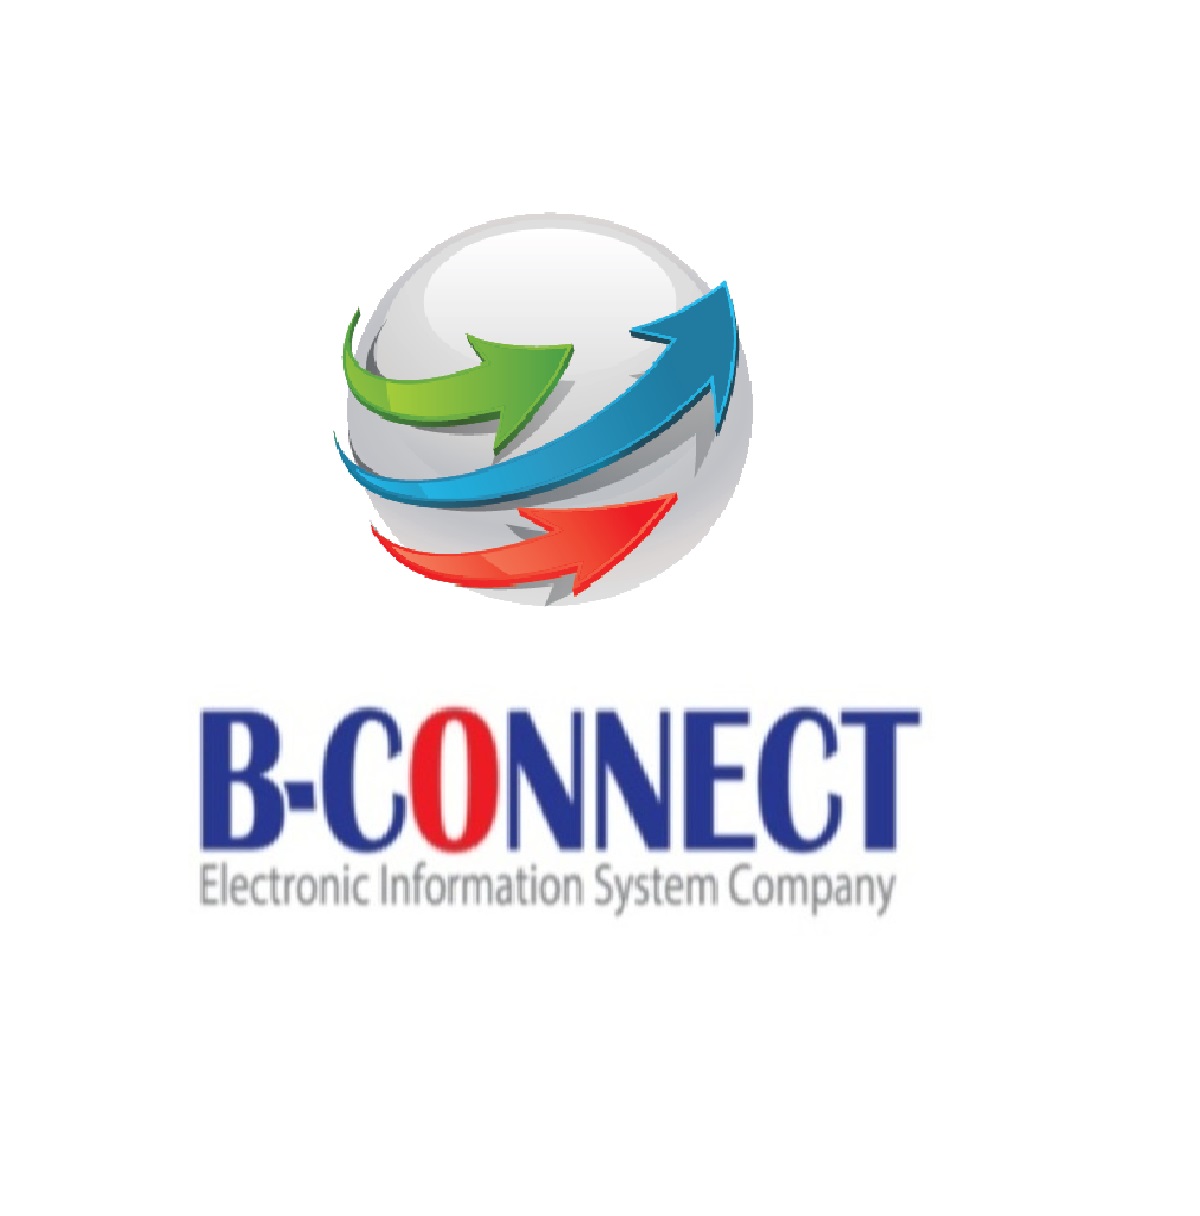 B-connect